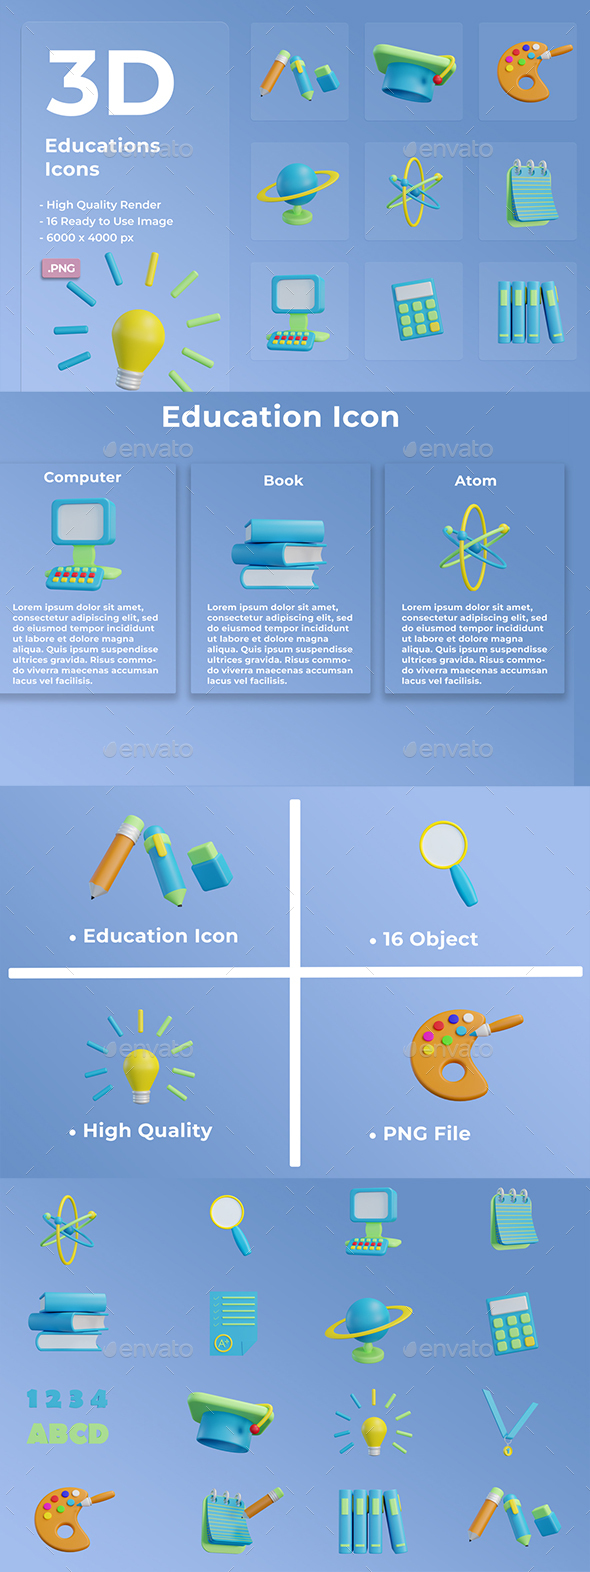 [DOWNLOAD]3D Educations Icon